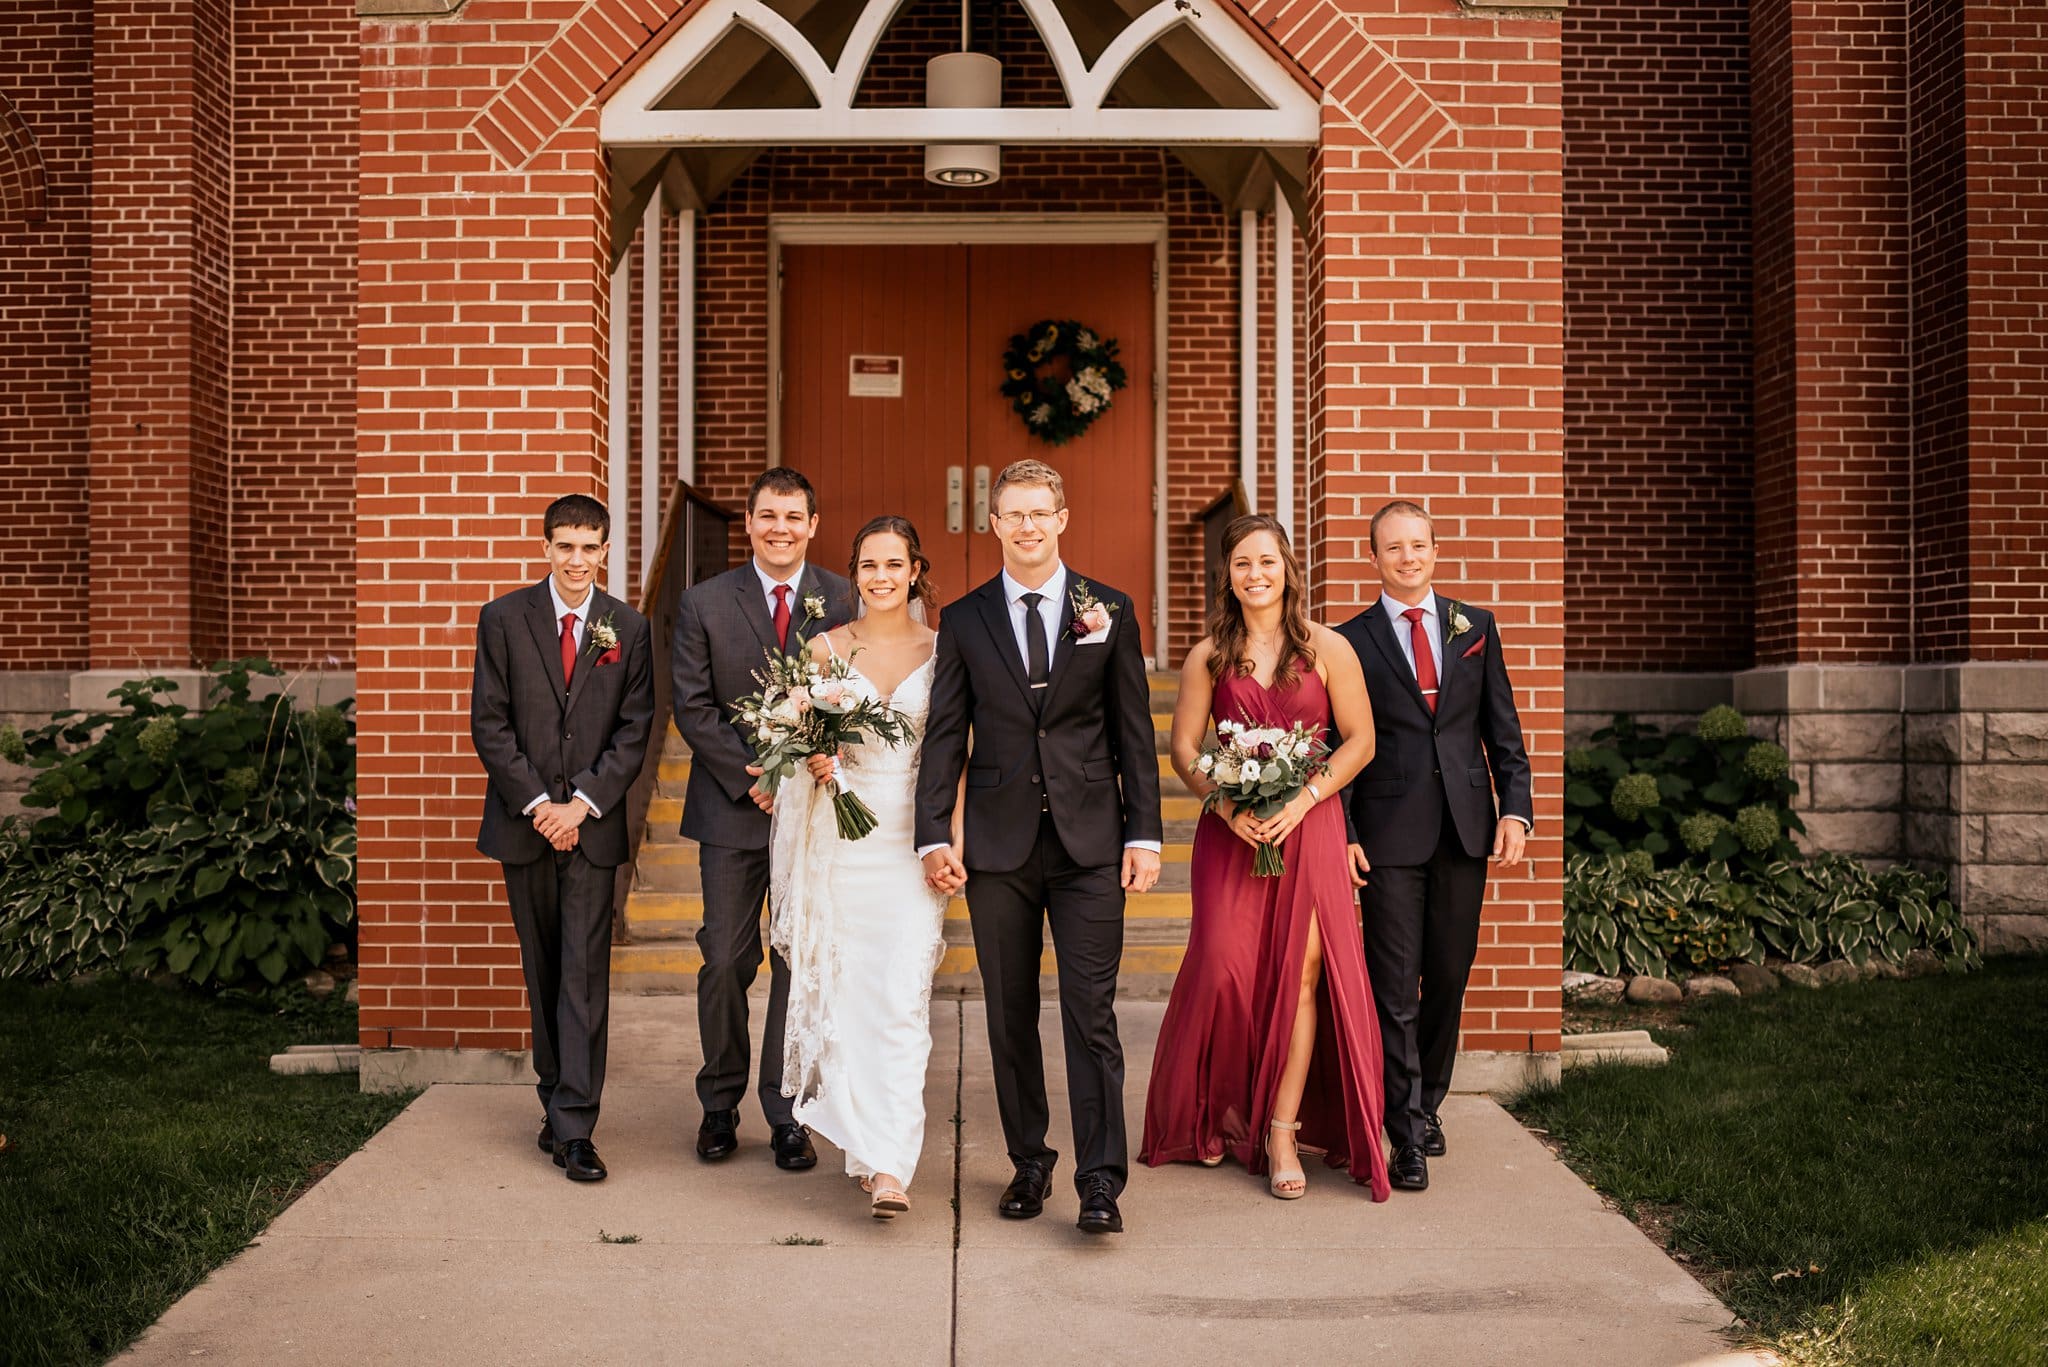 cranberry and dark gray wedding party